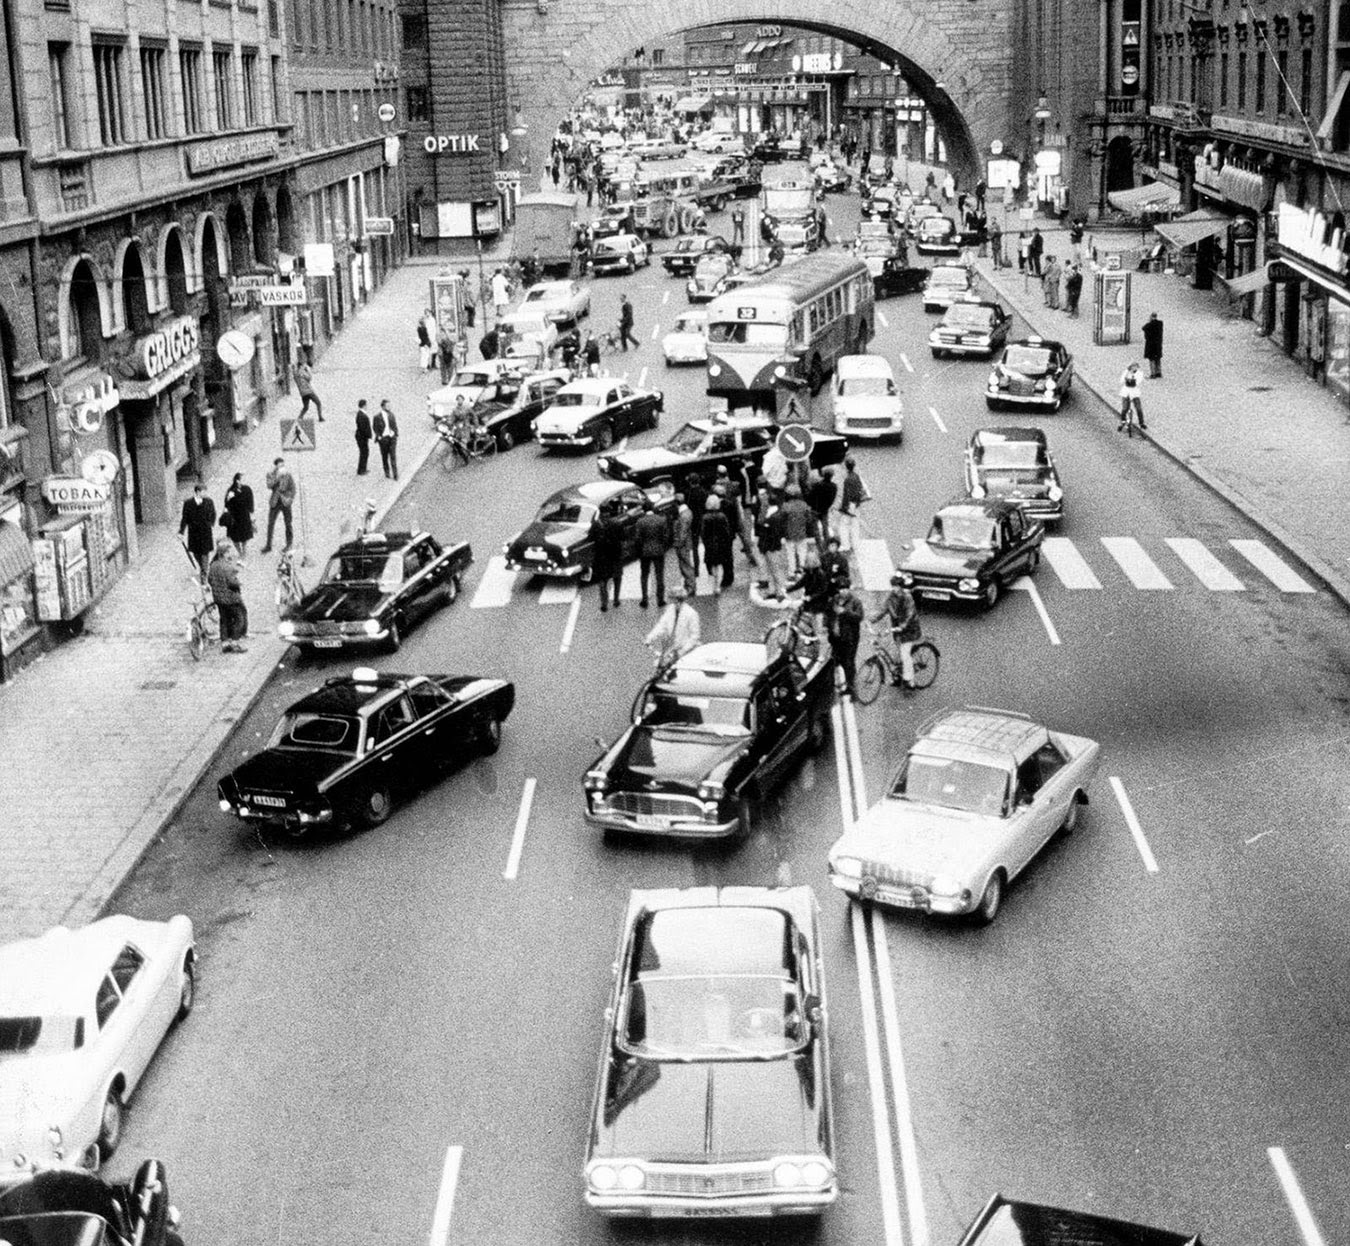 The famous day in 1967 when Sweden switched from driving on the left hand side to the right.